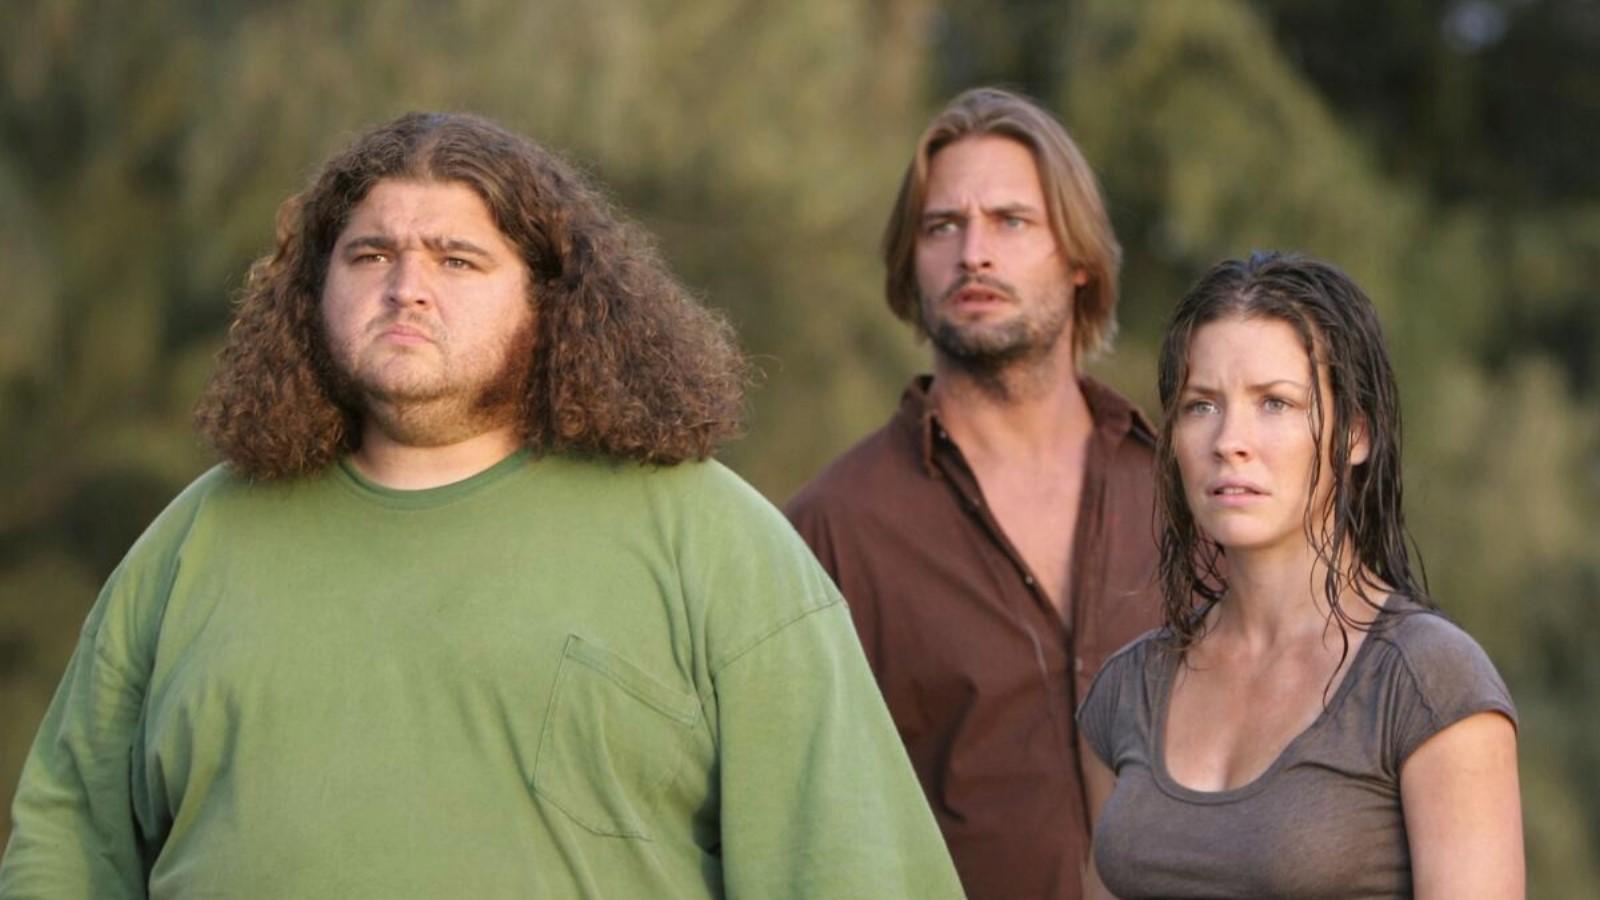 The cast of Lost staring into the distance